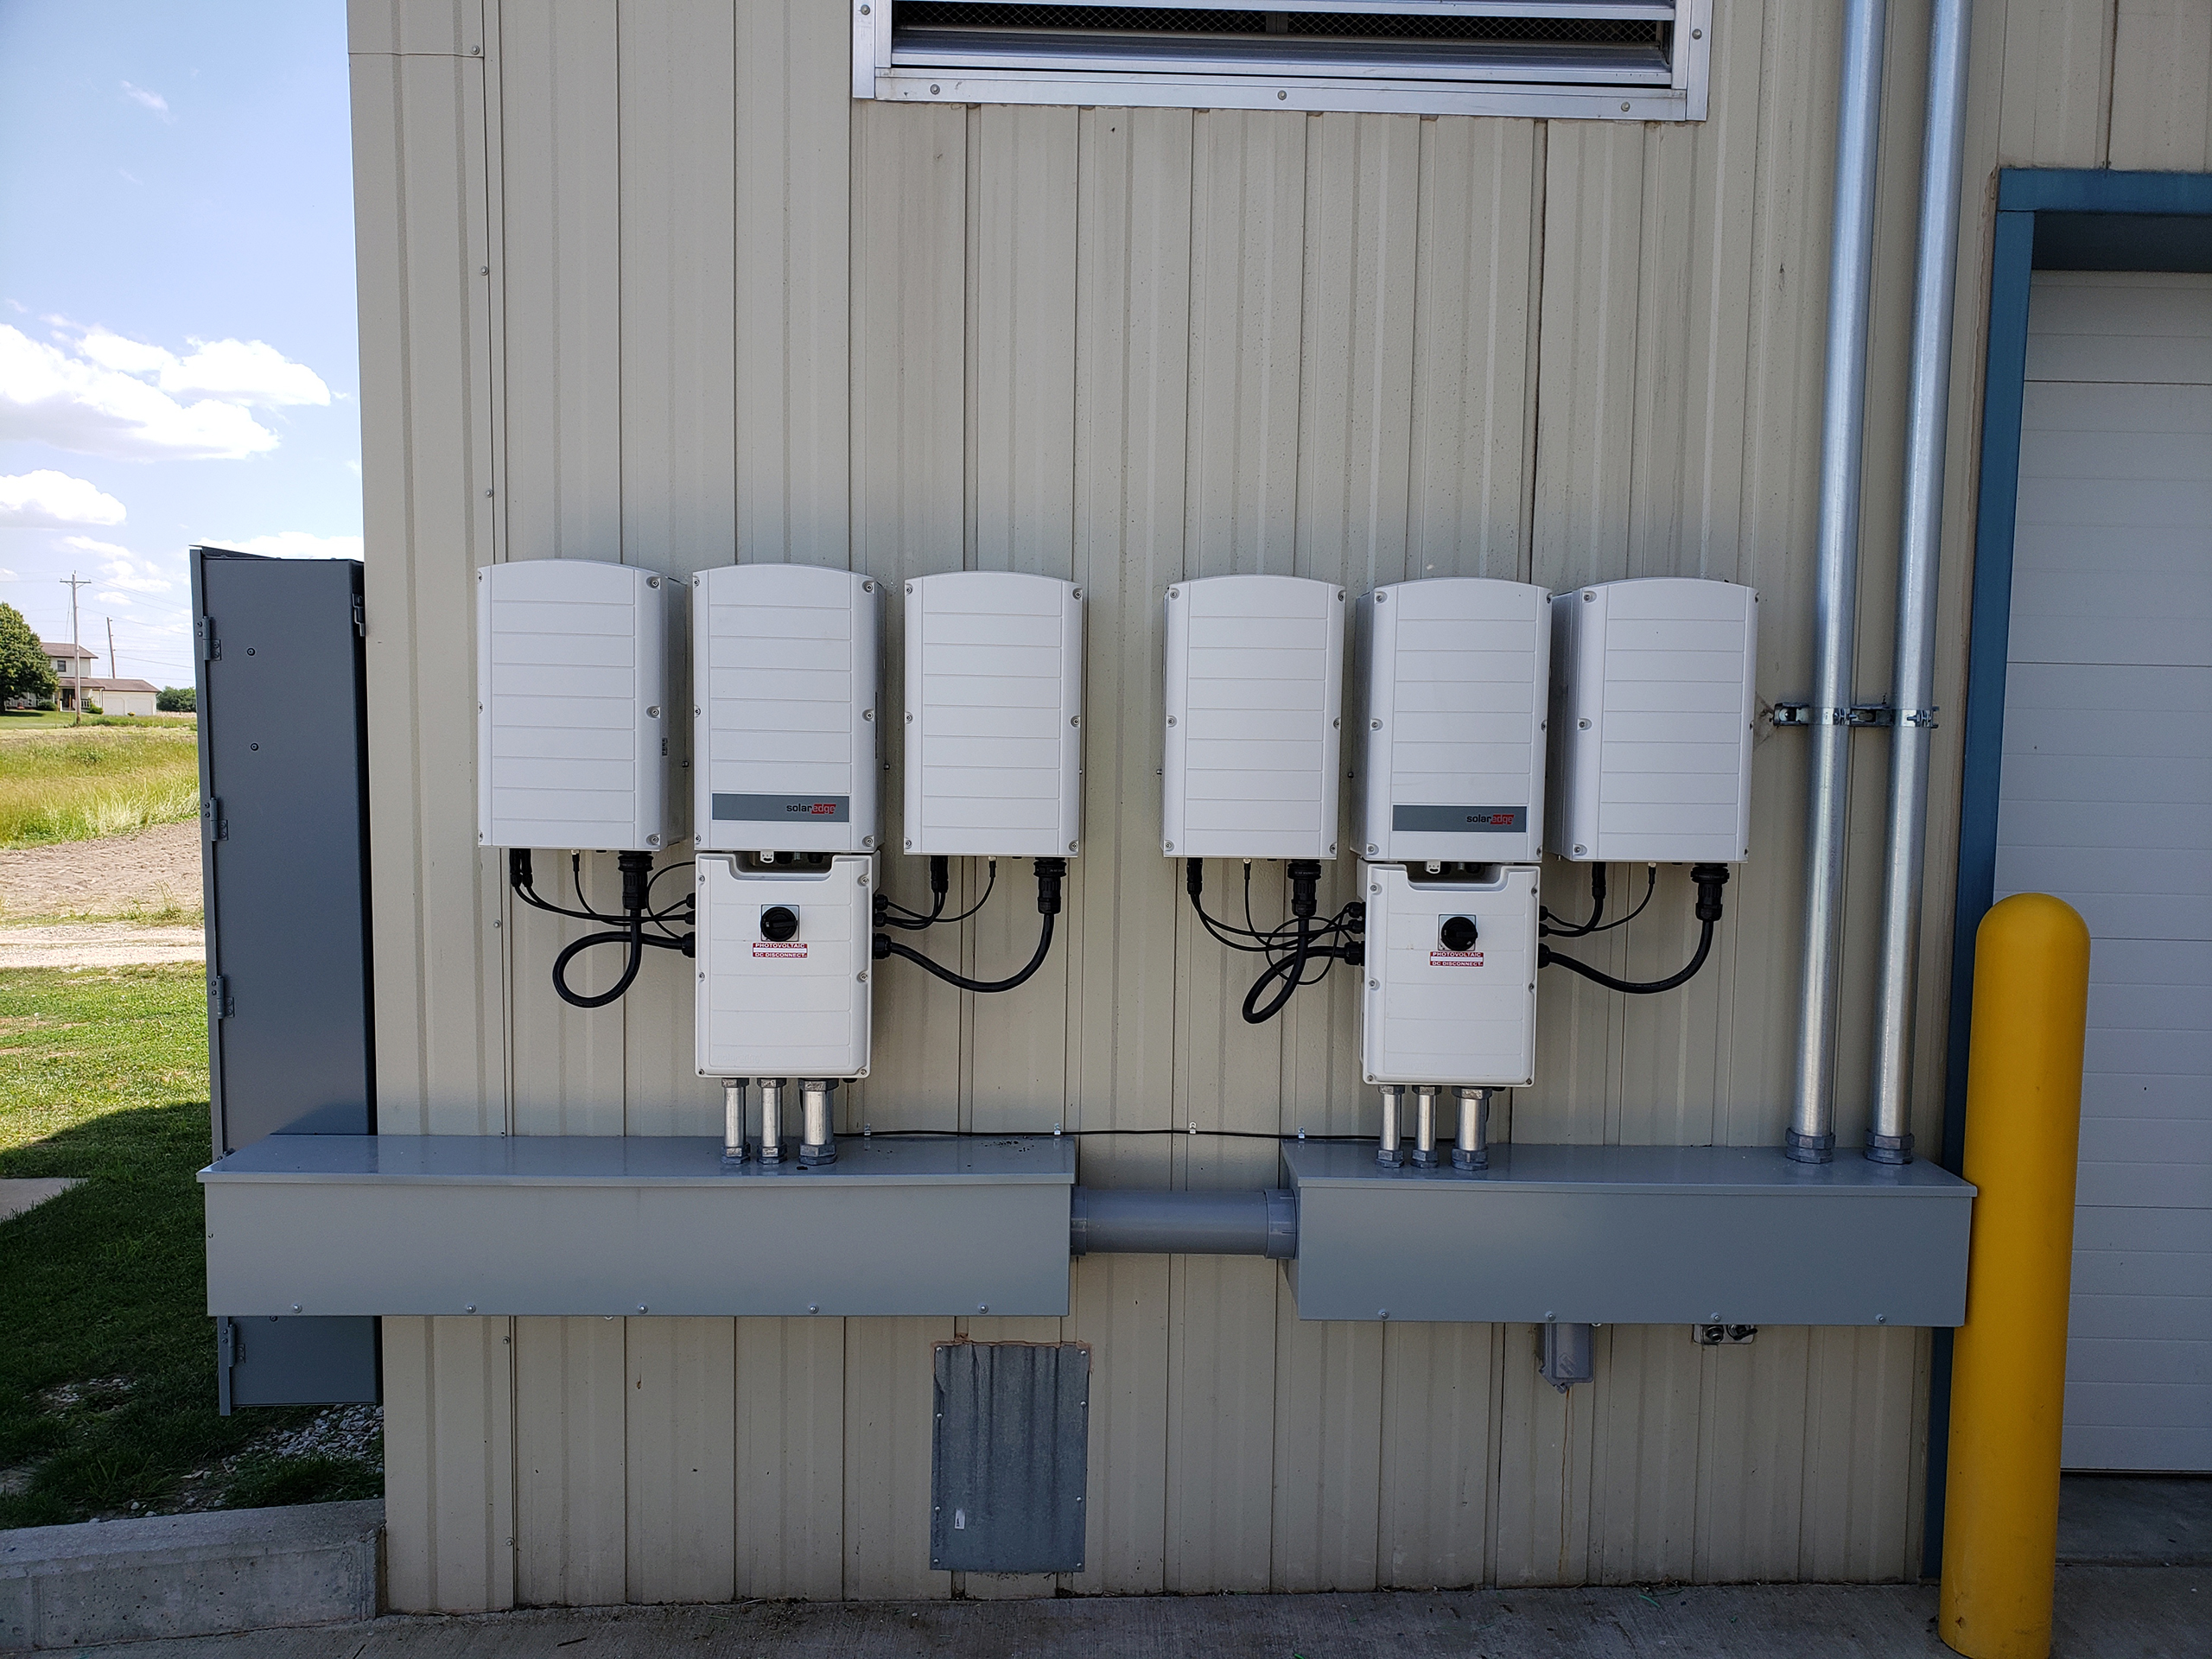 The corner of a tan metal building has six boxes neatly lined up with organized wiring and conduit running between the systems. The entrance of a garage door is seen to the right.